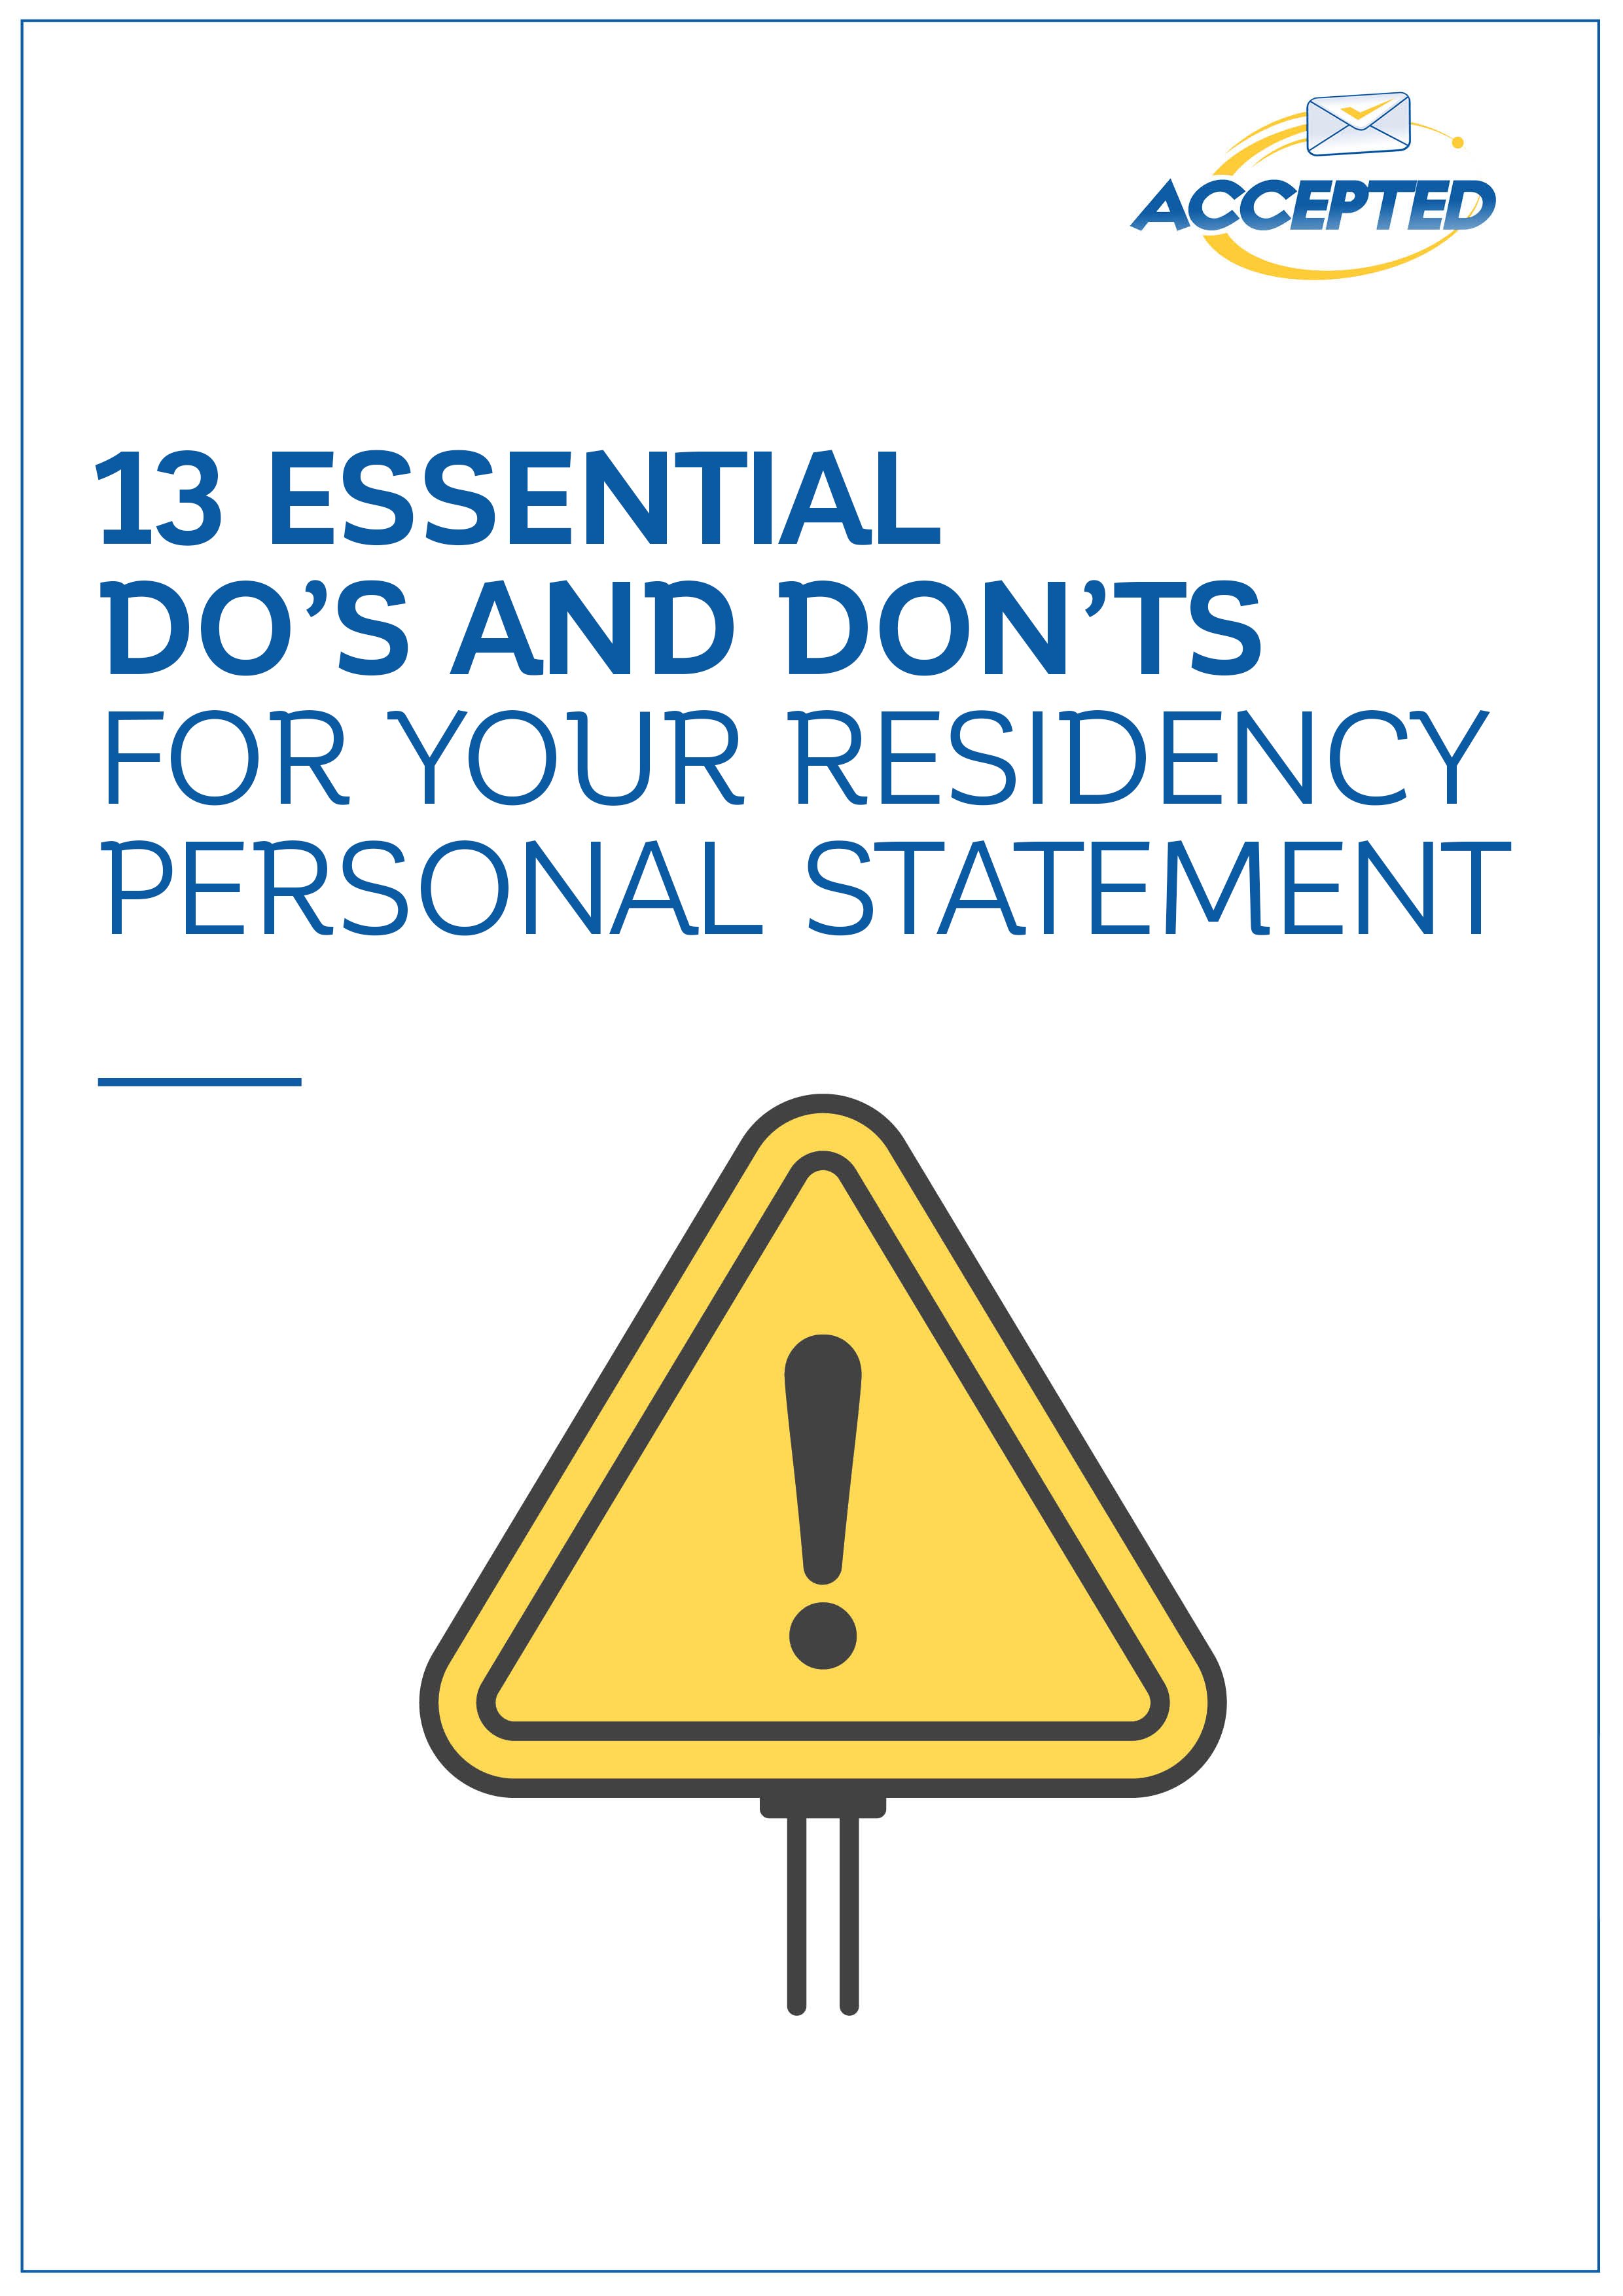 13 Essential Do’s and Don’ts for Your Residency Personal Statement